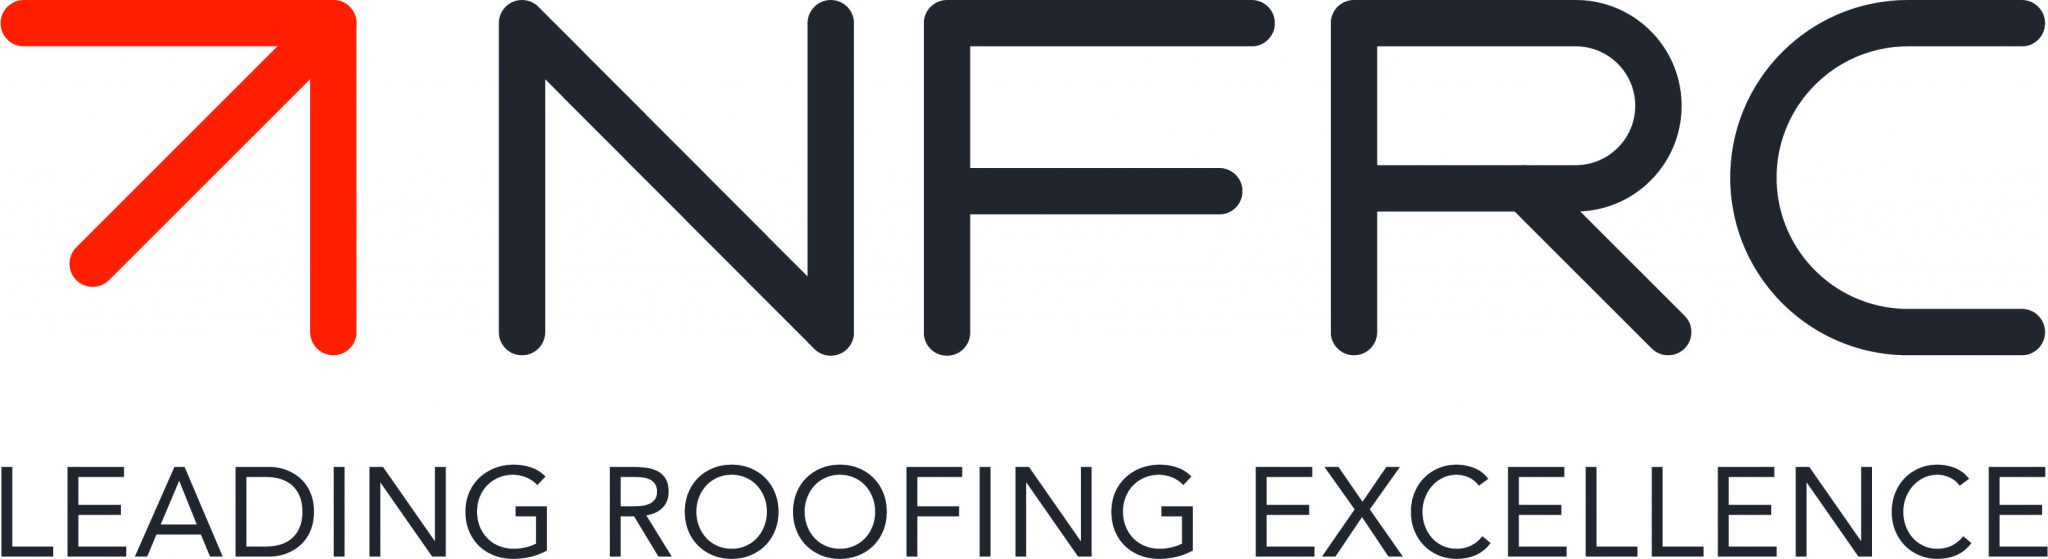 NFRC LAUNCHES NEW LOGO TO REFLECT FUTURE GROWTH